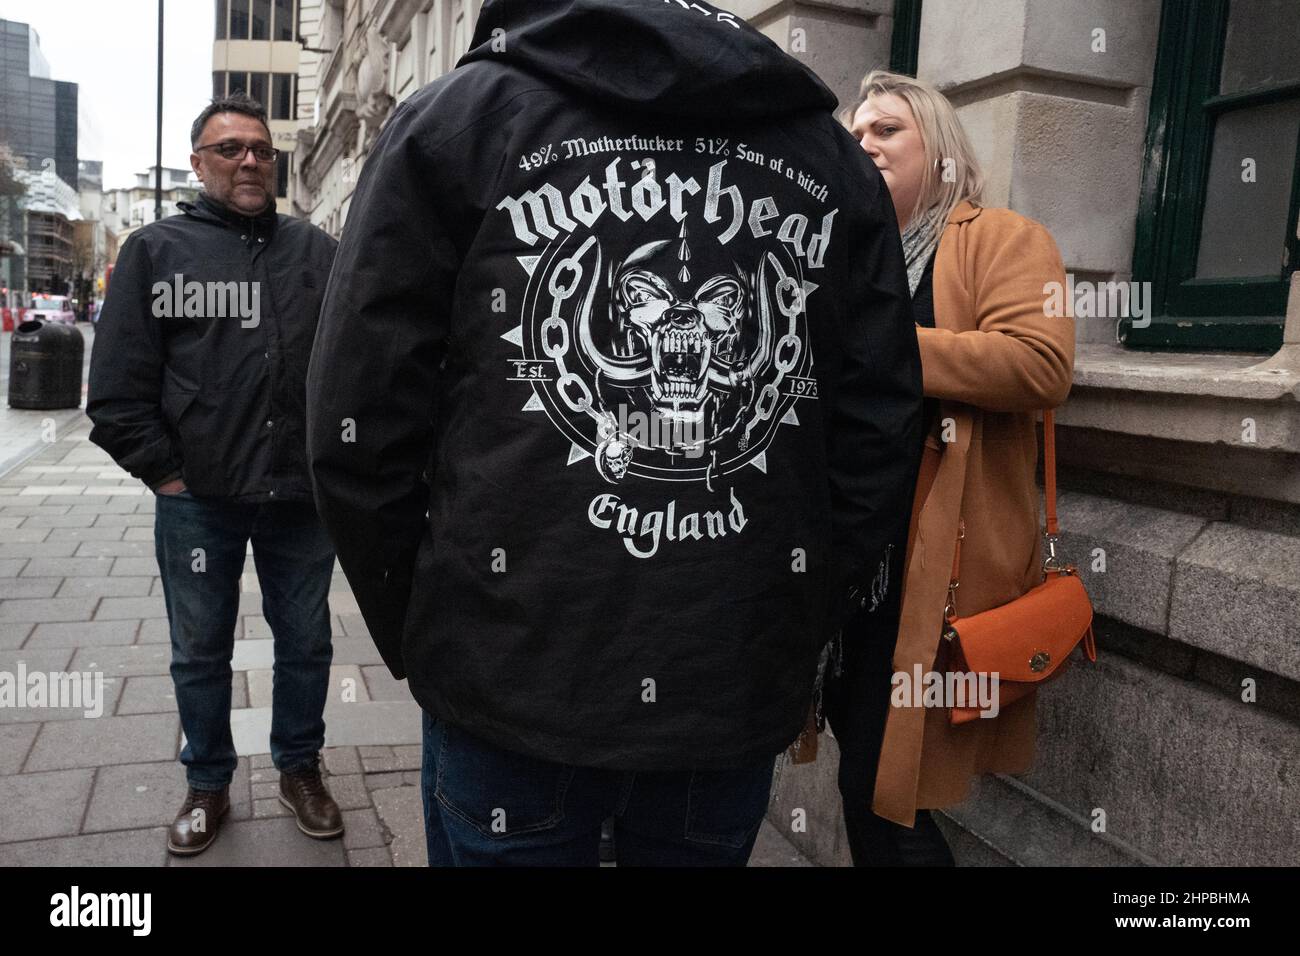 People chatting on a London street. The main element is Snaggletooth the emblem of Heavy Rock band Motorhead. Stock Photo